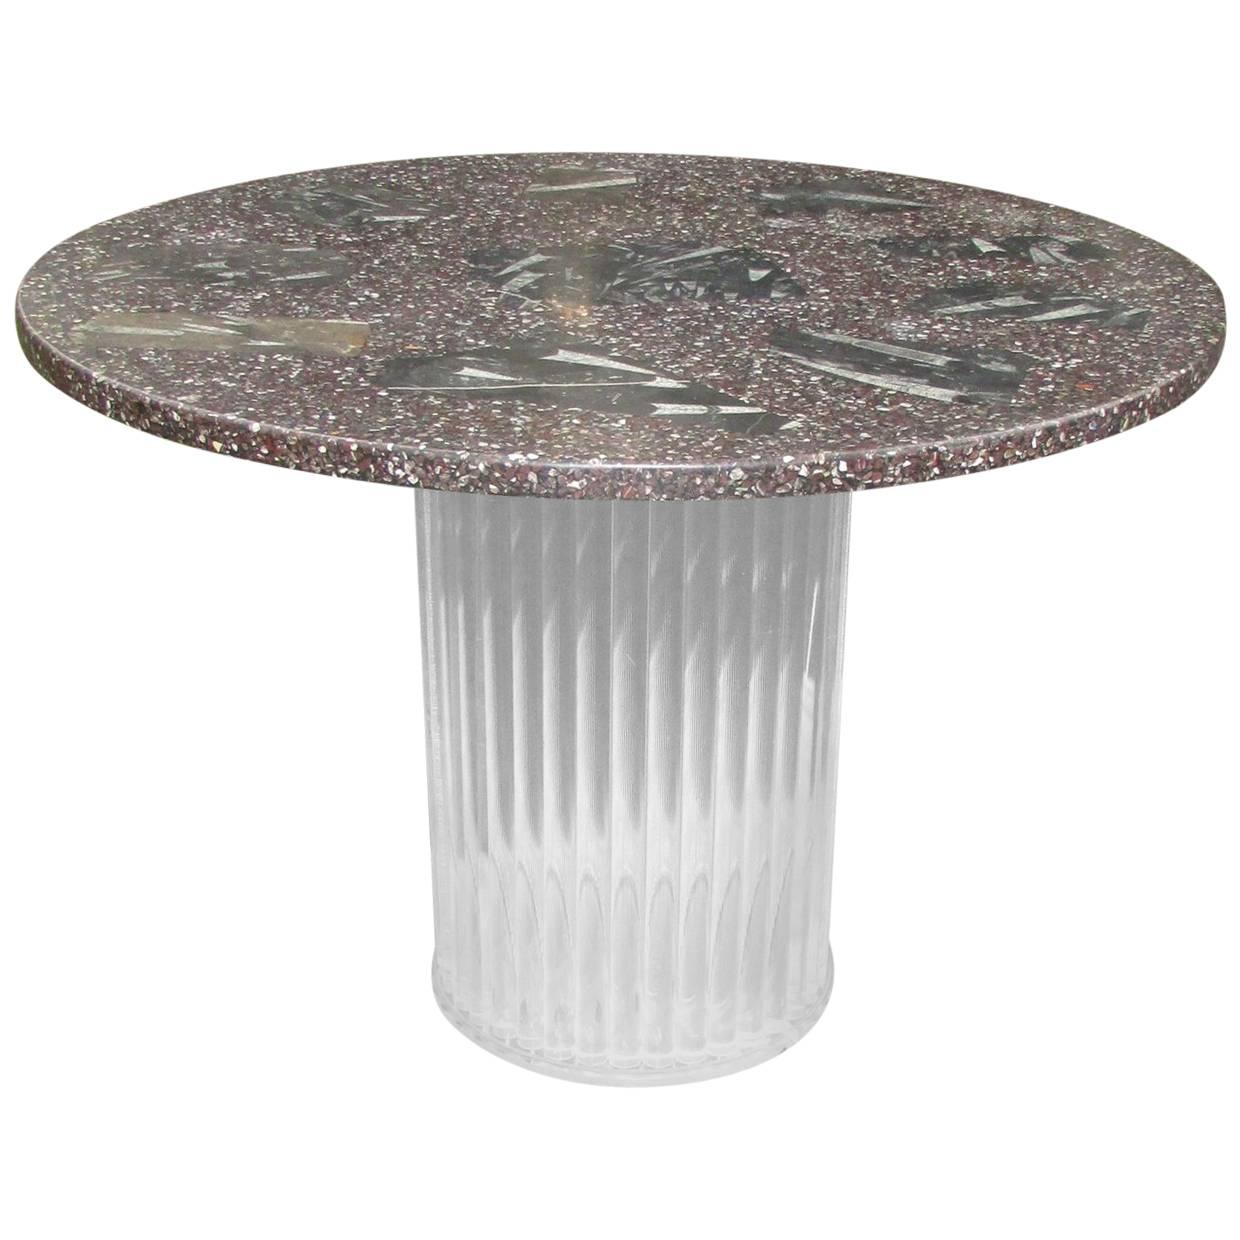 Mid-Century Modern Lucite and Fossil Stone Round Dining Table